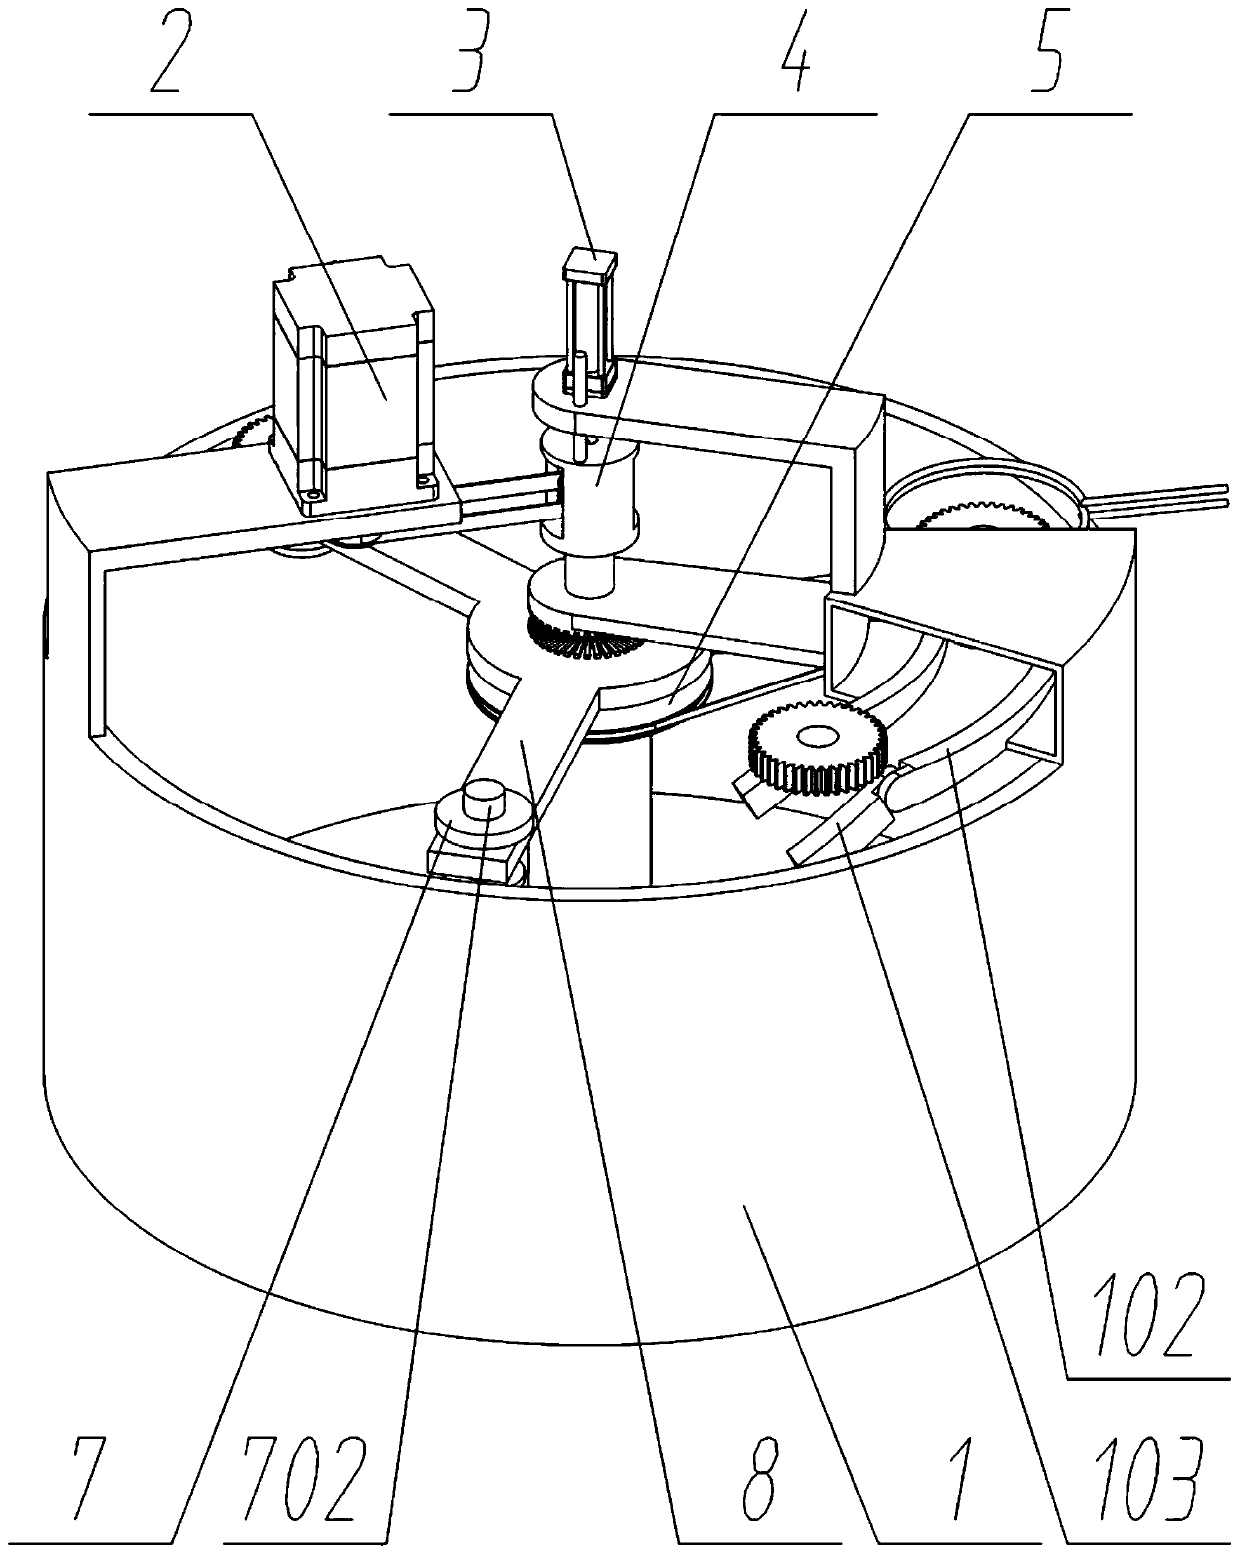 Automatic quenching device for gear machining